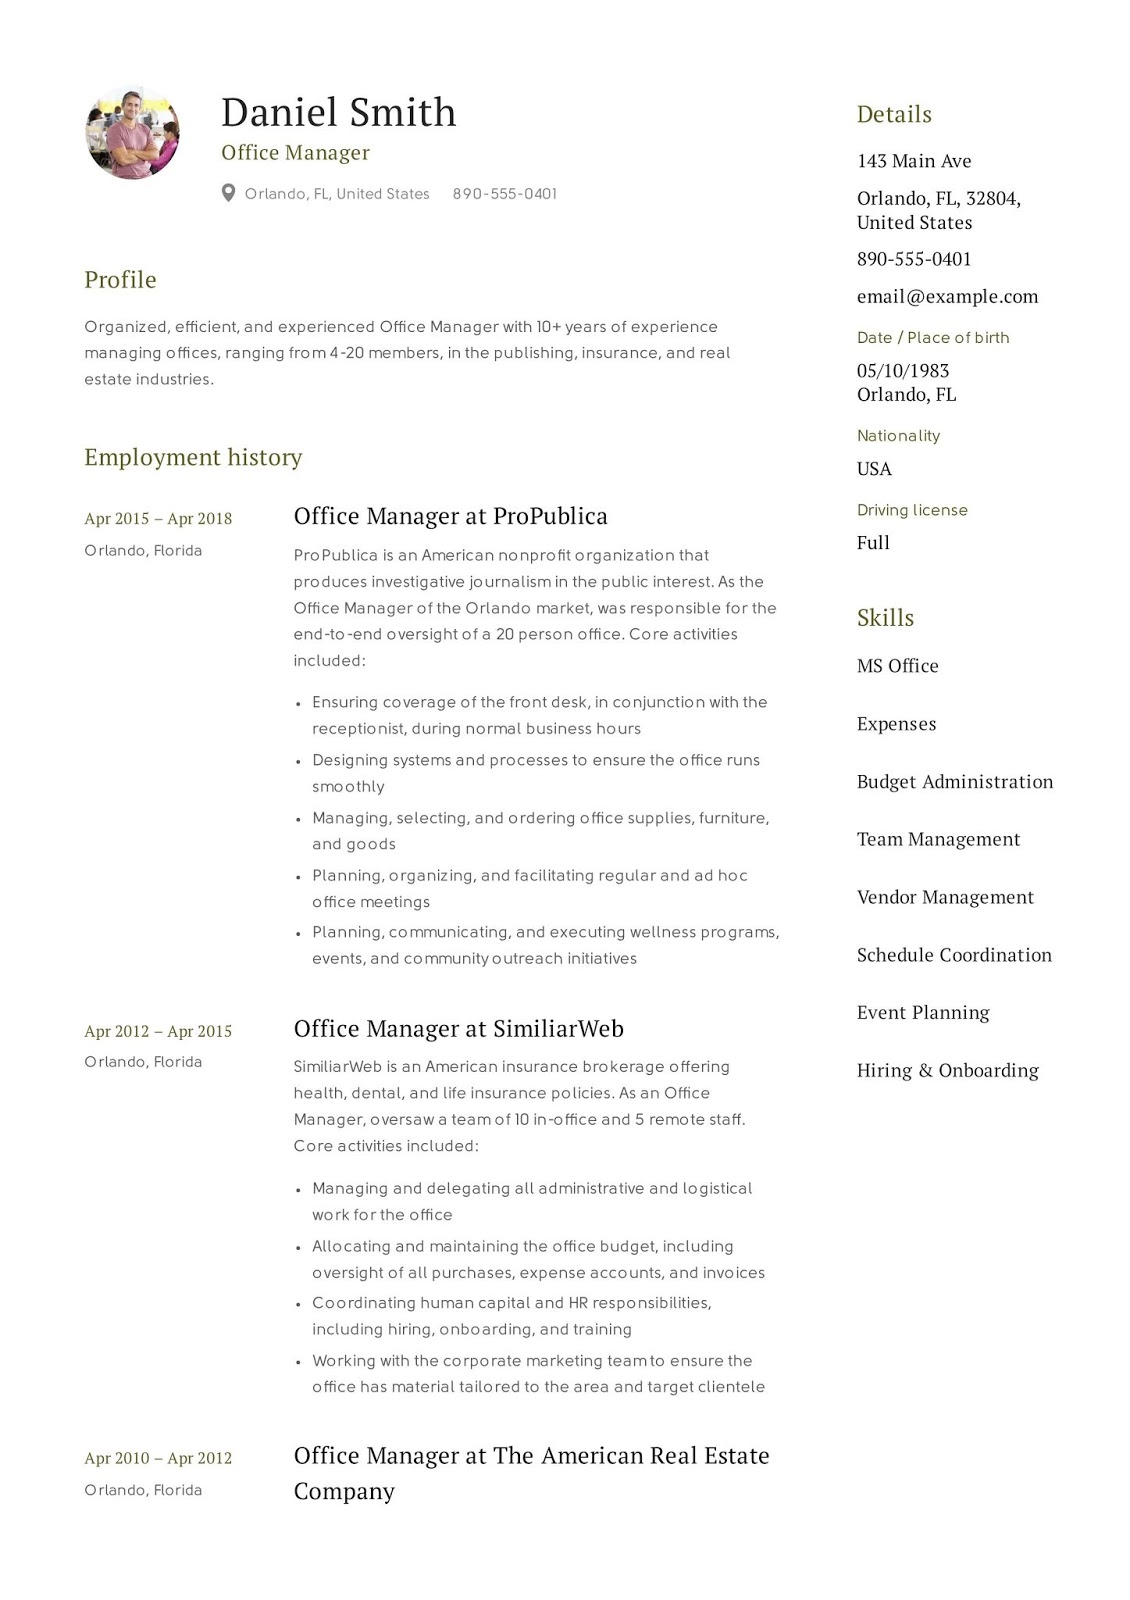 office manager resume examples 2019, office manager resume examples, office manager resume examples 2017, front office manager resume samples, office manager resume example, office manager resume samples 2018, office manager resume samples free, office manager resume samples 2019,